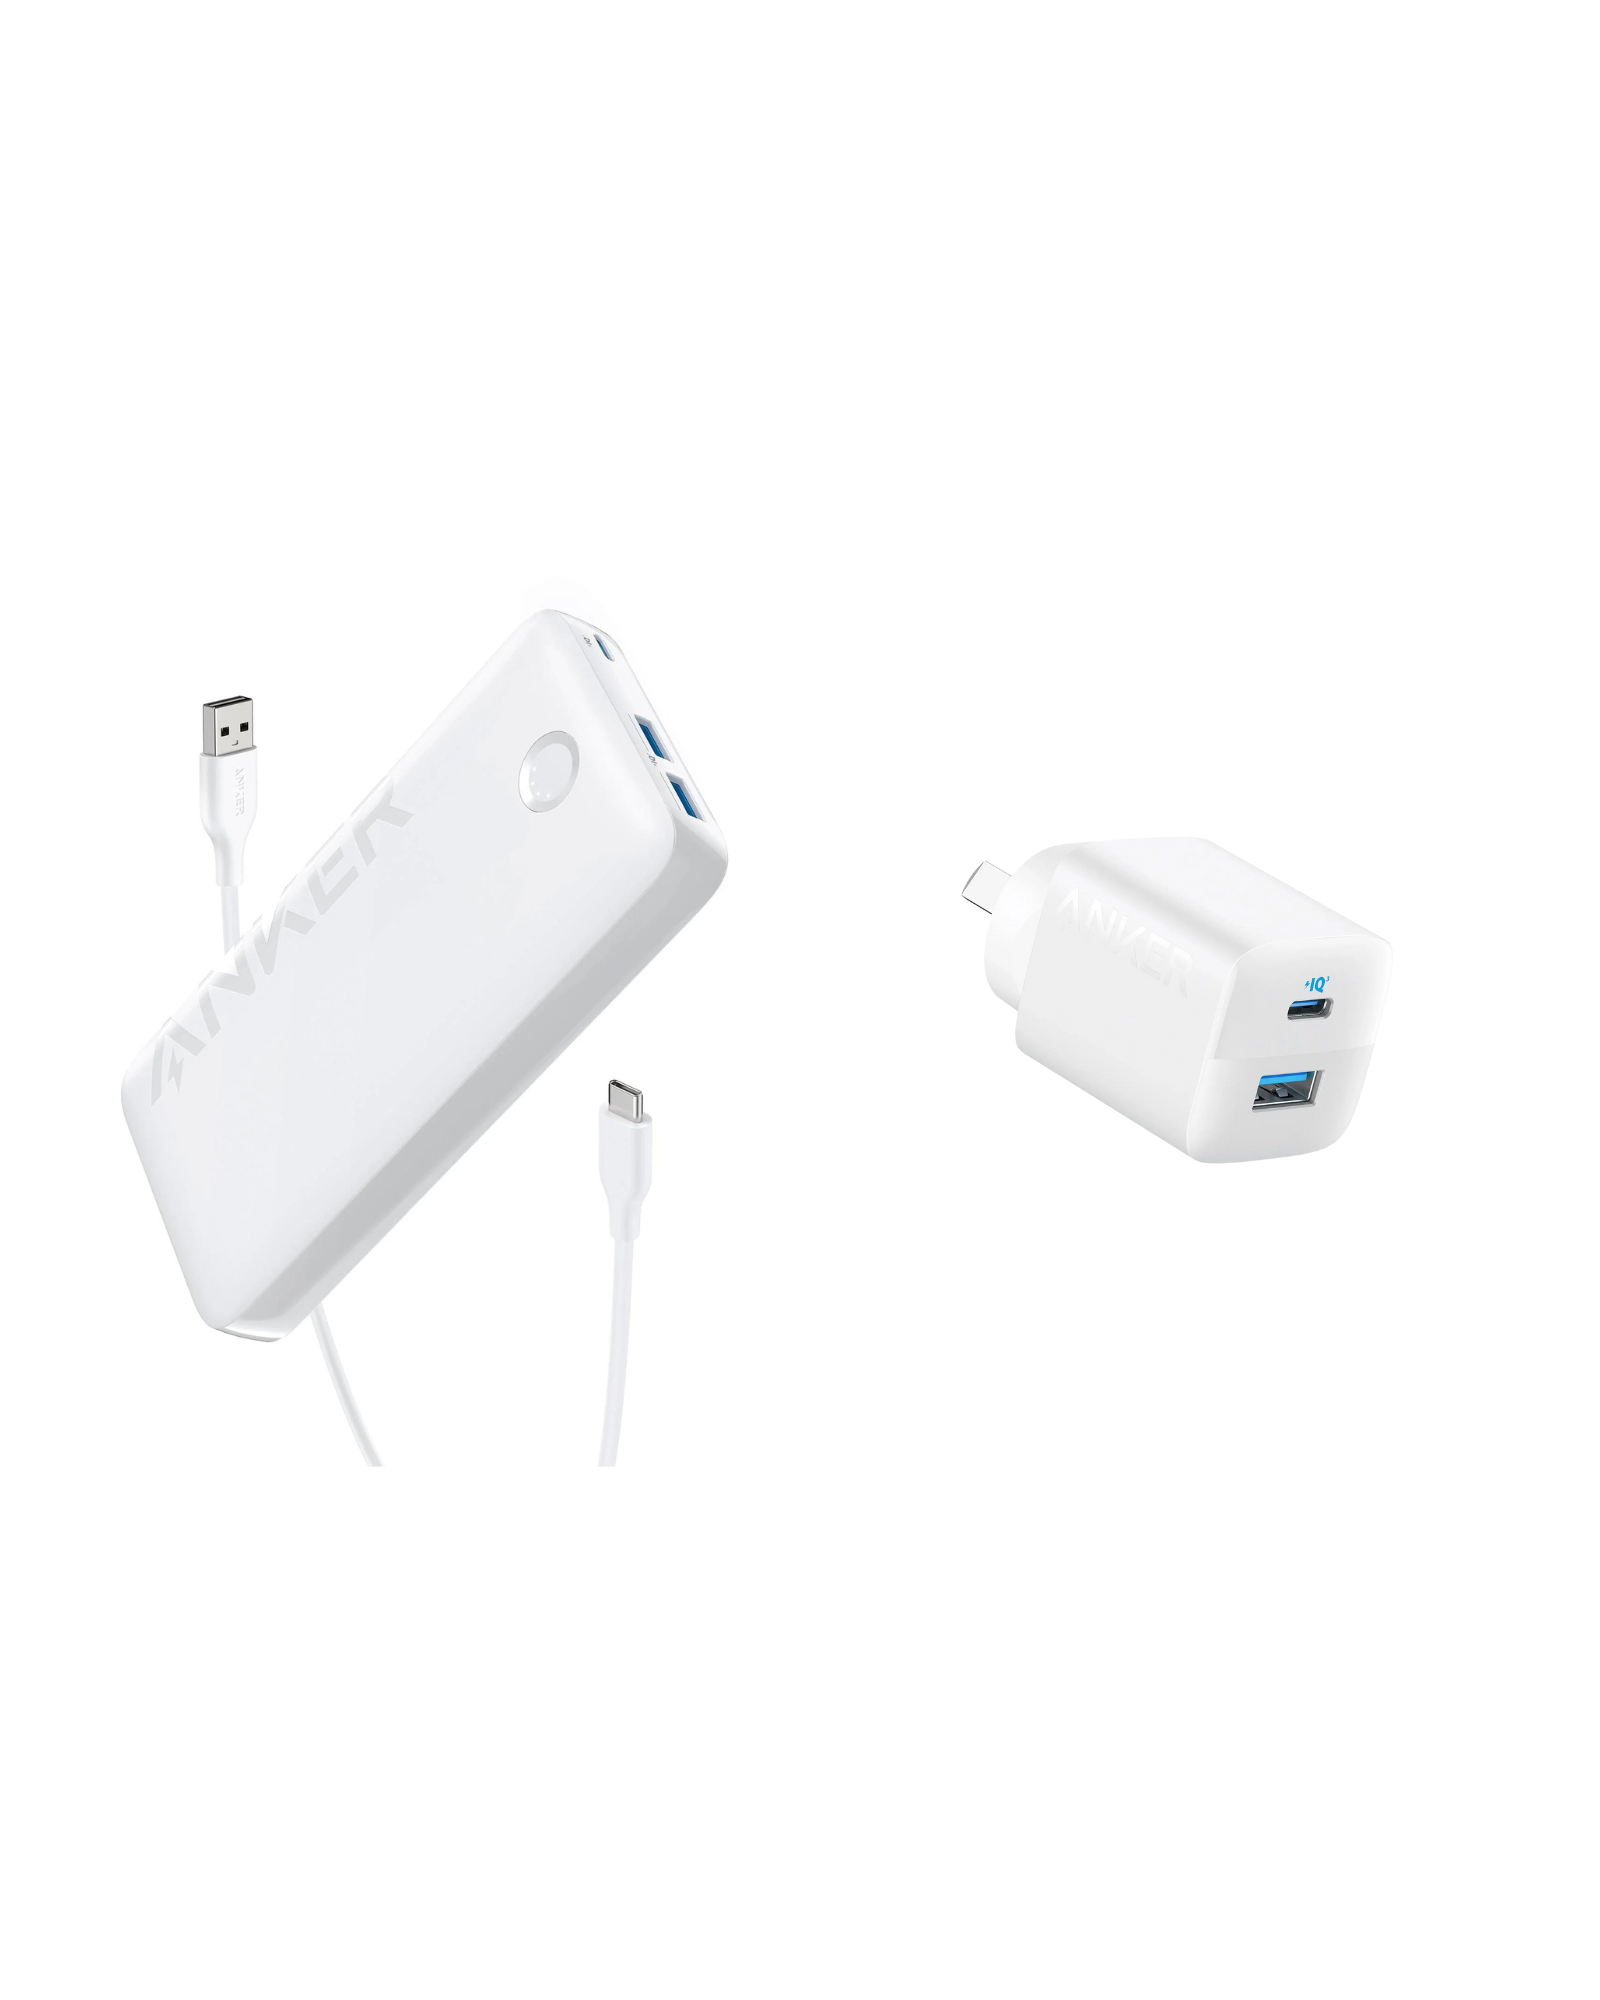 Anker 335 Power Bank (PowerCore 20K) and Anker <b>323</b> Charger (33W)